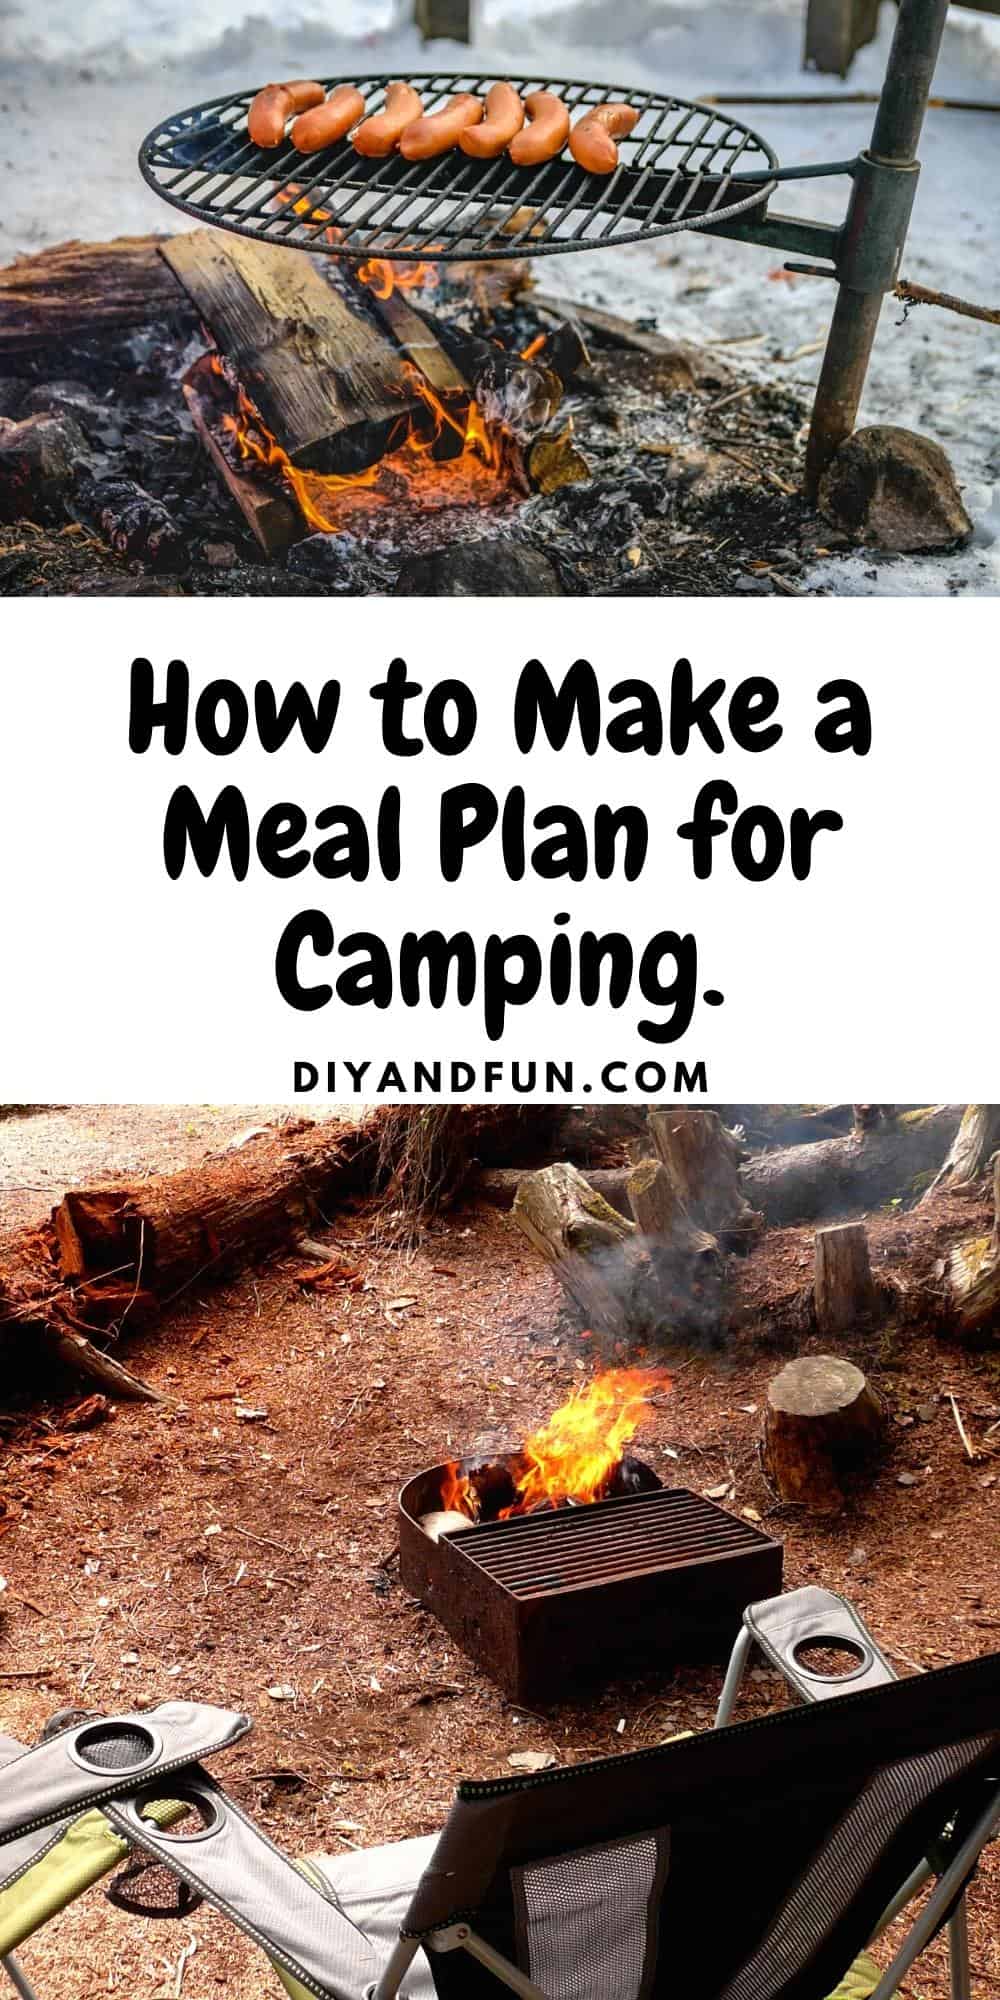 How to Make a Meal Plan for Camping, a simple guide for beginners for planning and packing food for a camping trip. Free Downloads.